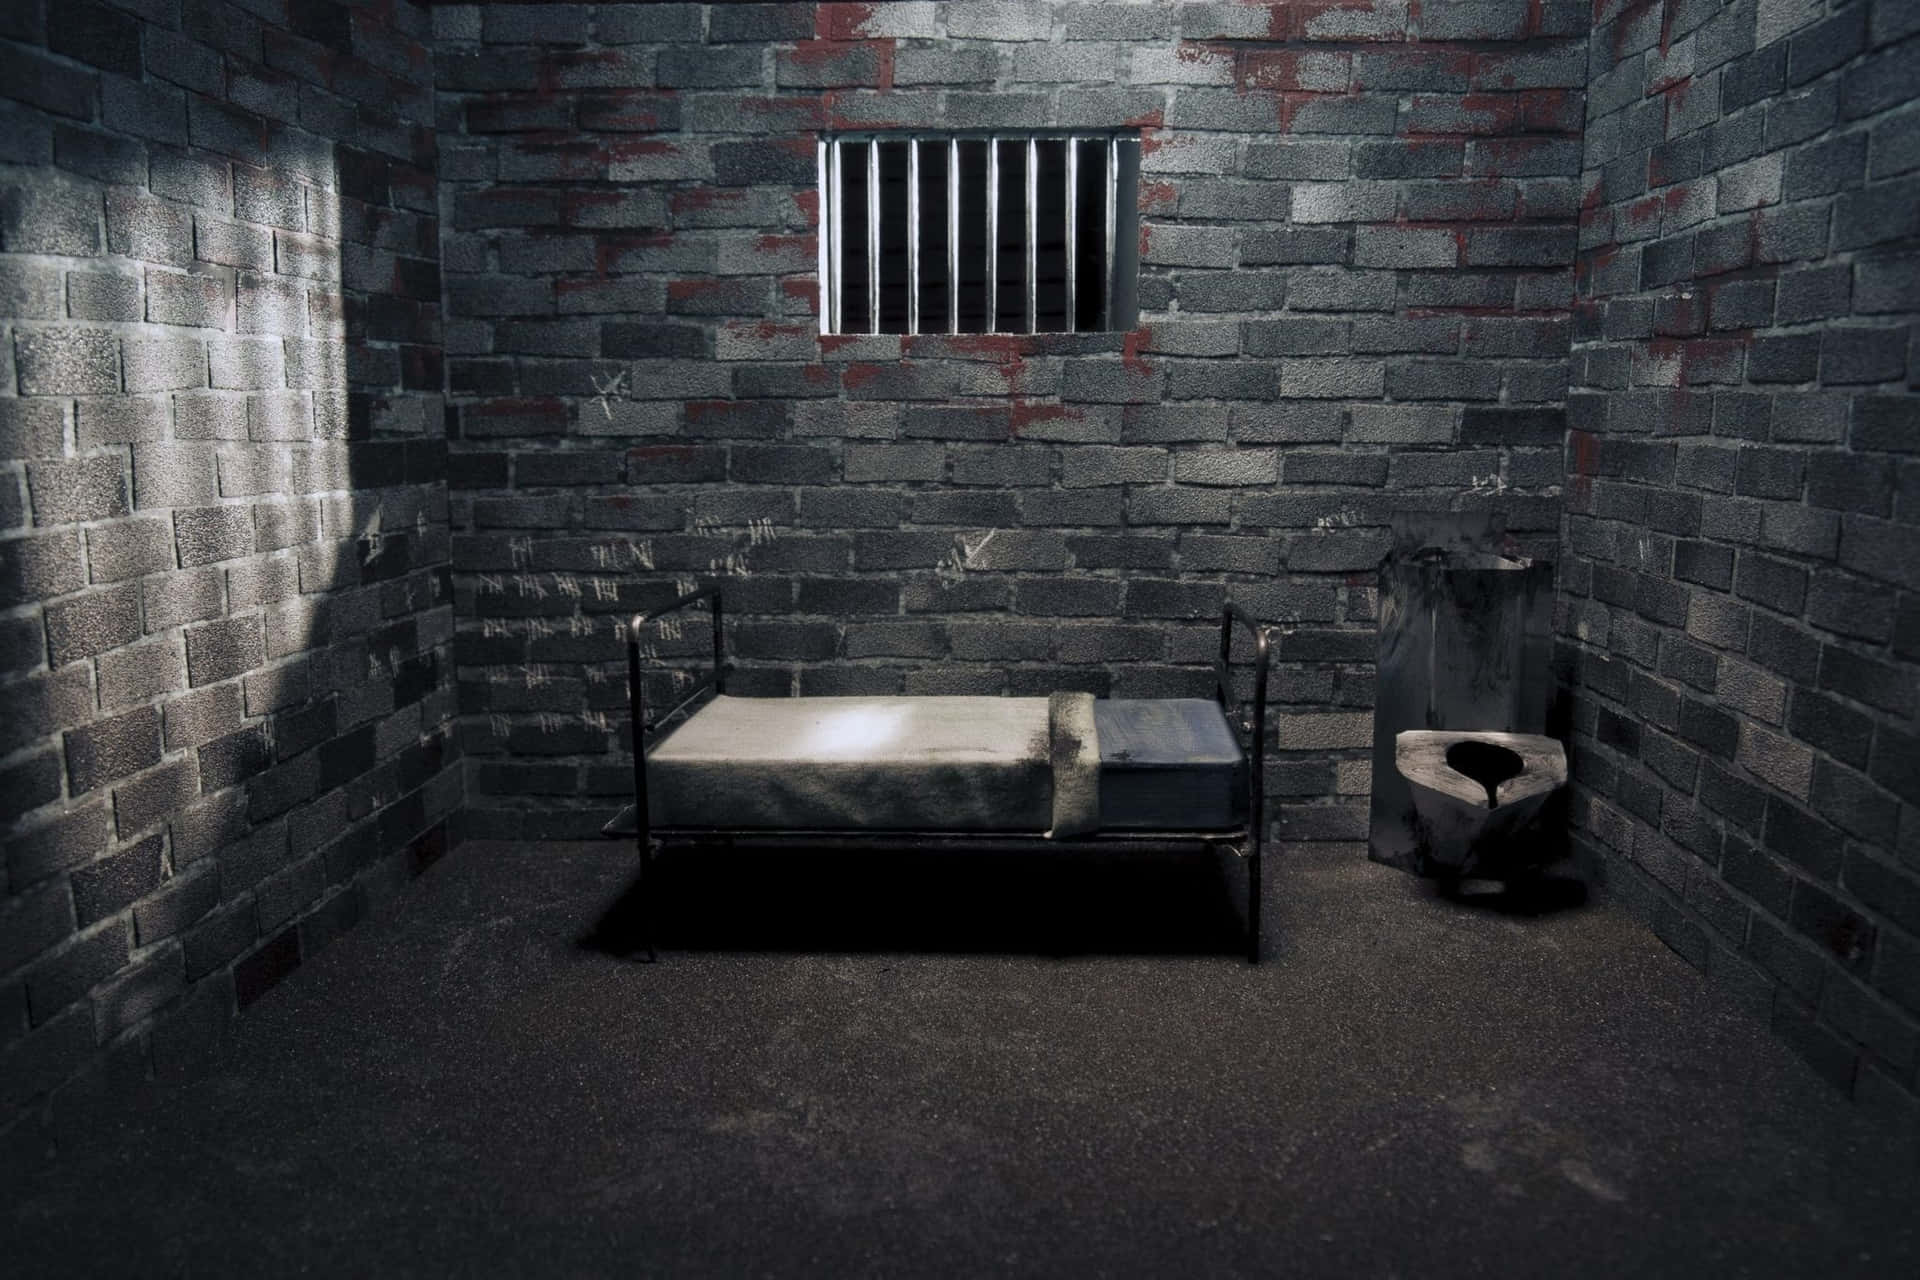 A Bed In A Prison Cell